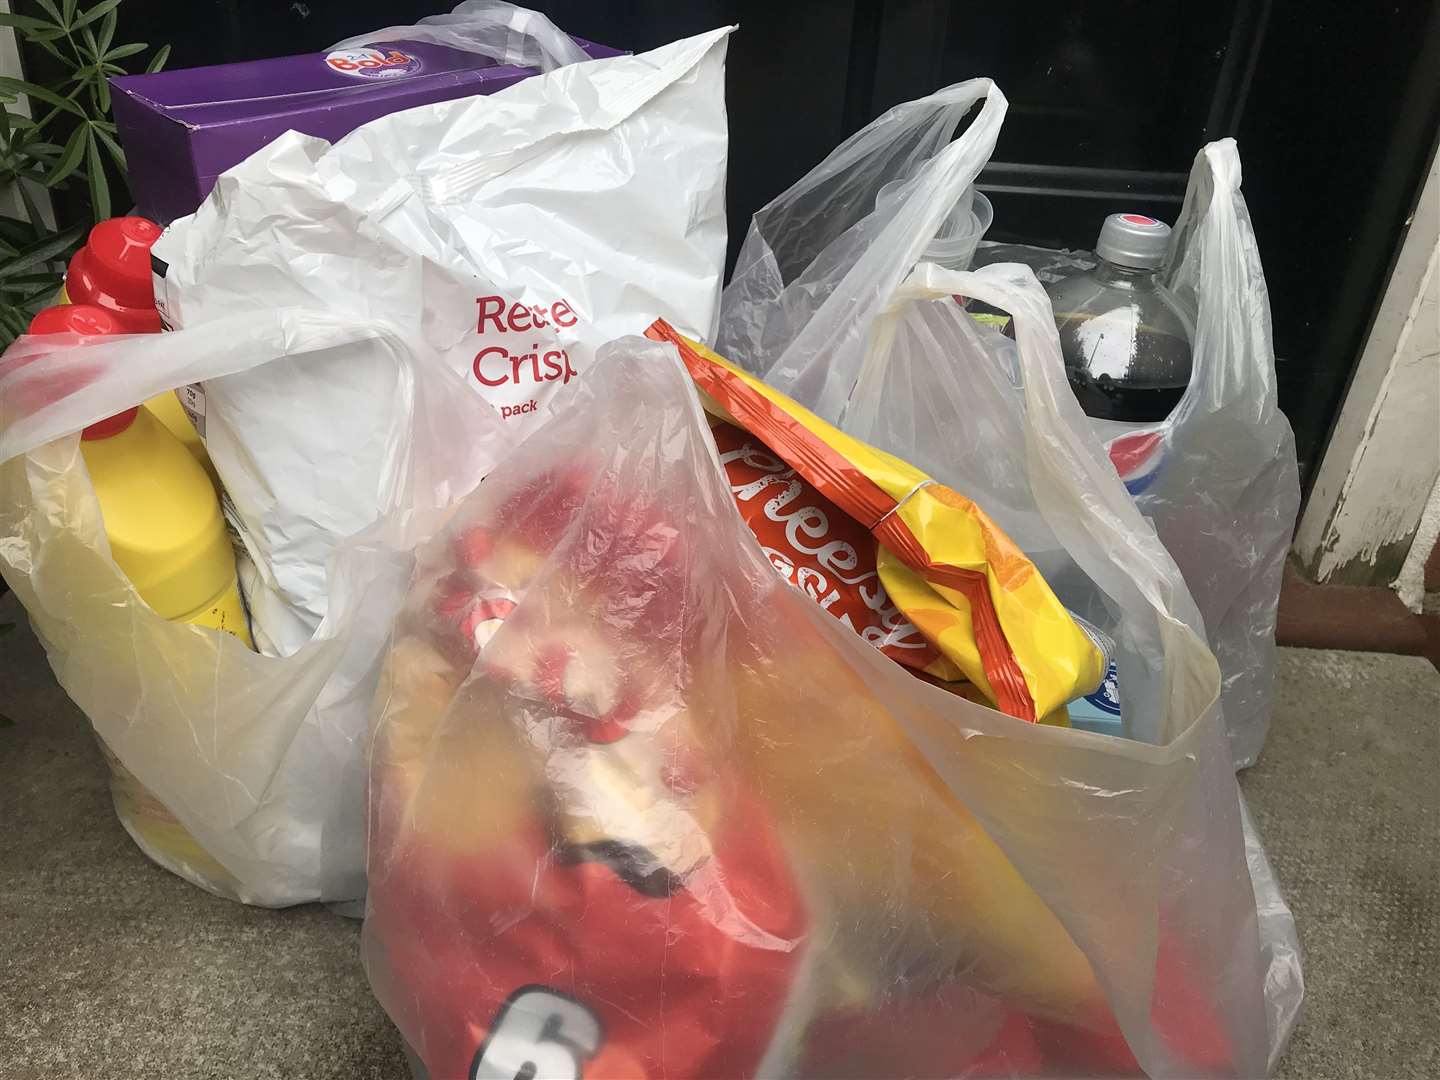 Plastic bags will cost 10p across England from May 21